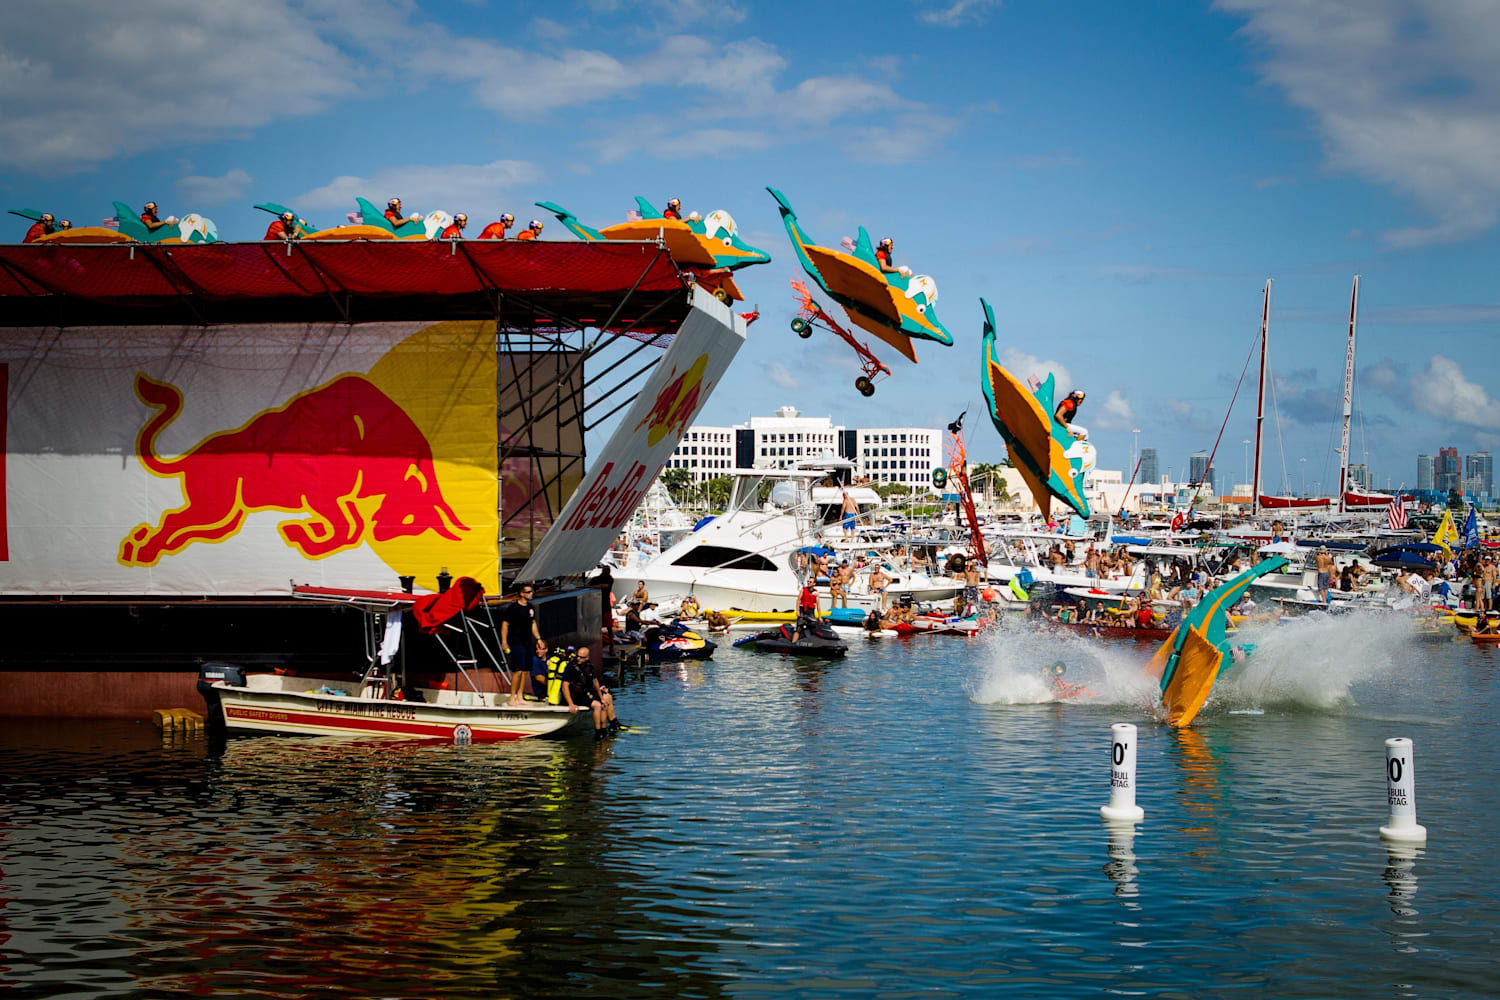 Action from National Red Bull Flugtag in Miami